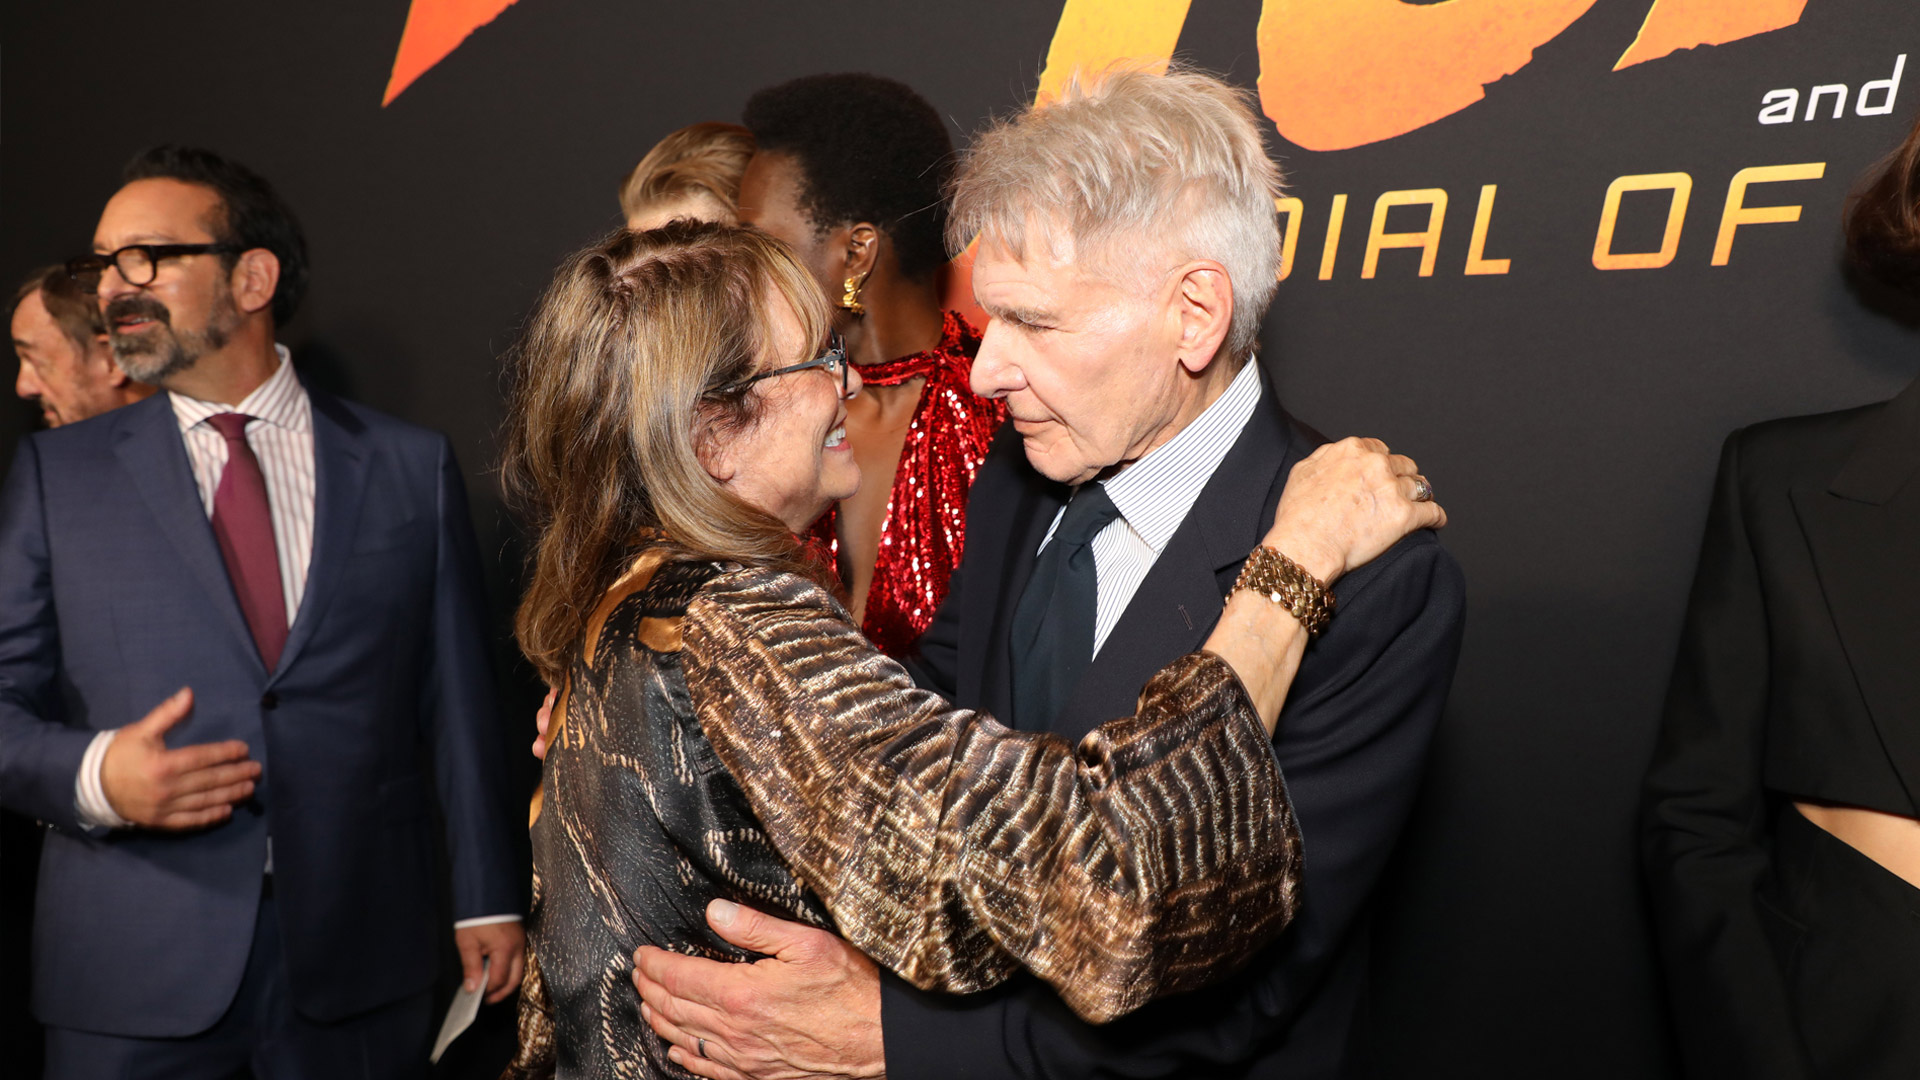 Harrison Ford and Karen Allen at the U.S. premiere red carpet